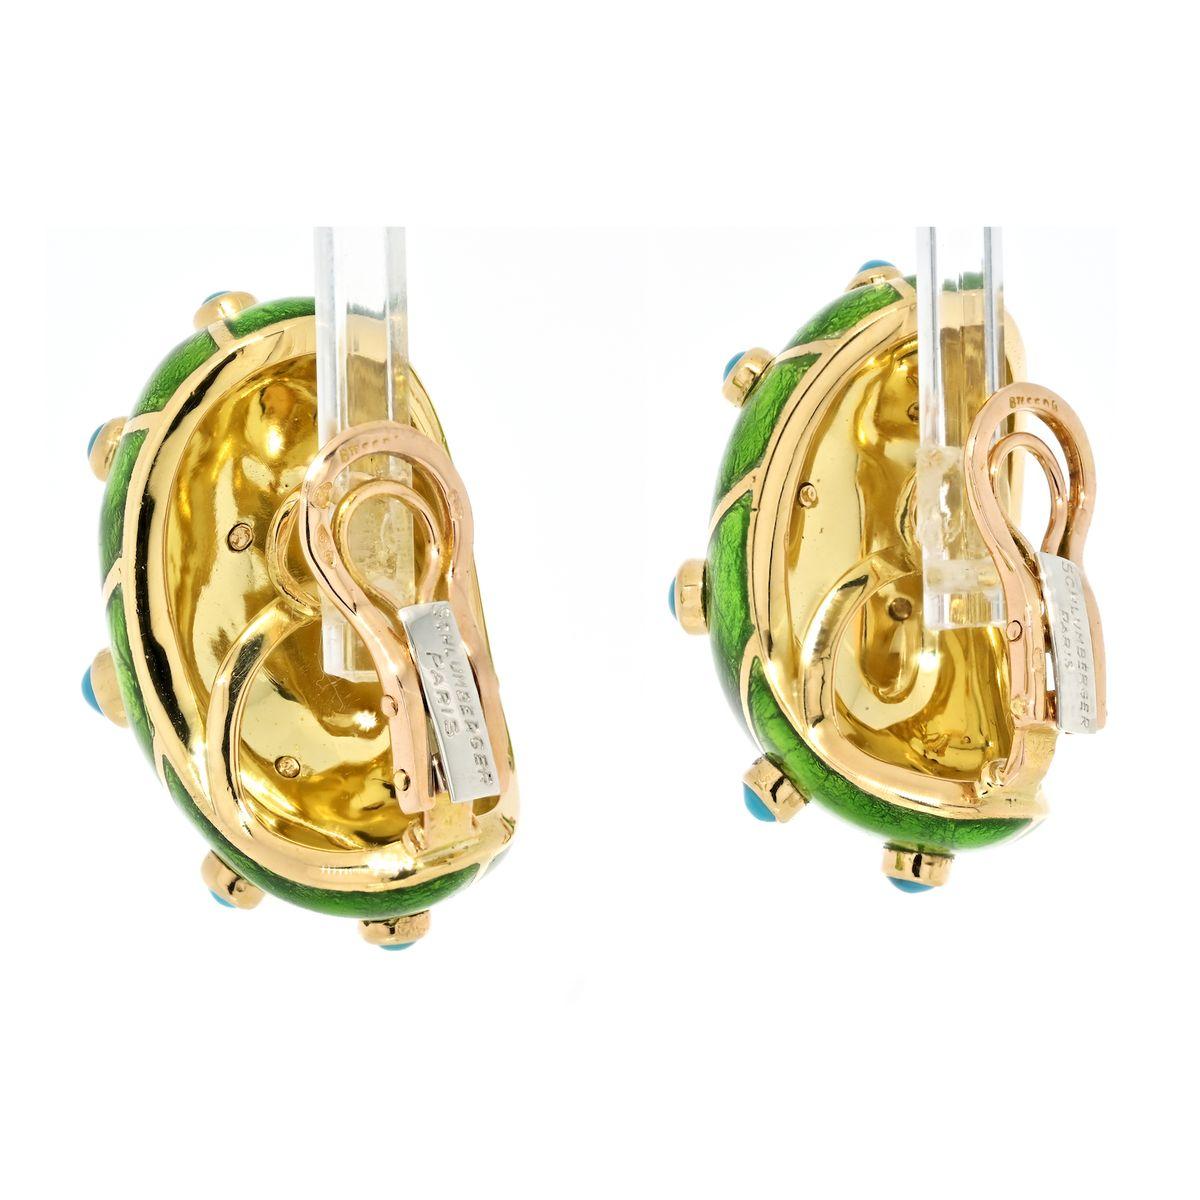 Behold the rarity of a remarkable pair: the Tiffany & Co. Schlumberger Platinum & 18K Yellow Gold Green Enamel Turquoise Earrings, often fondly referred to as 